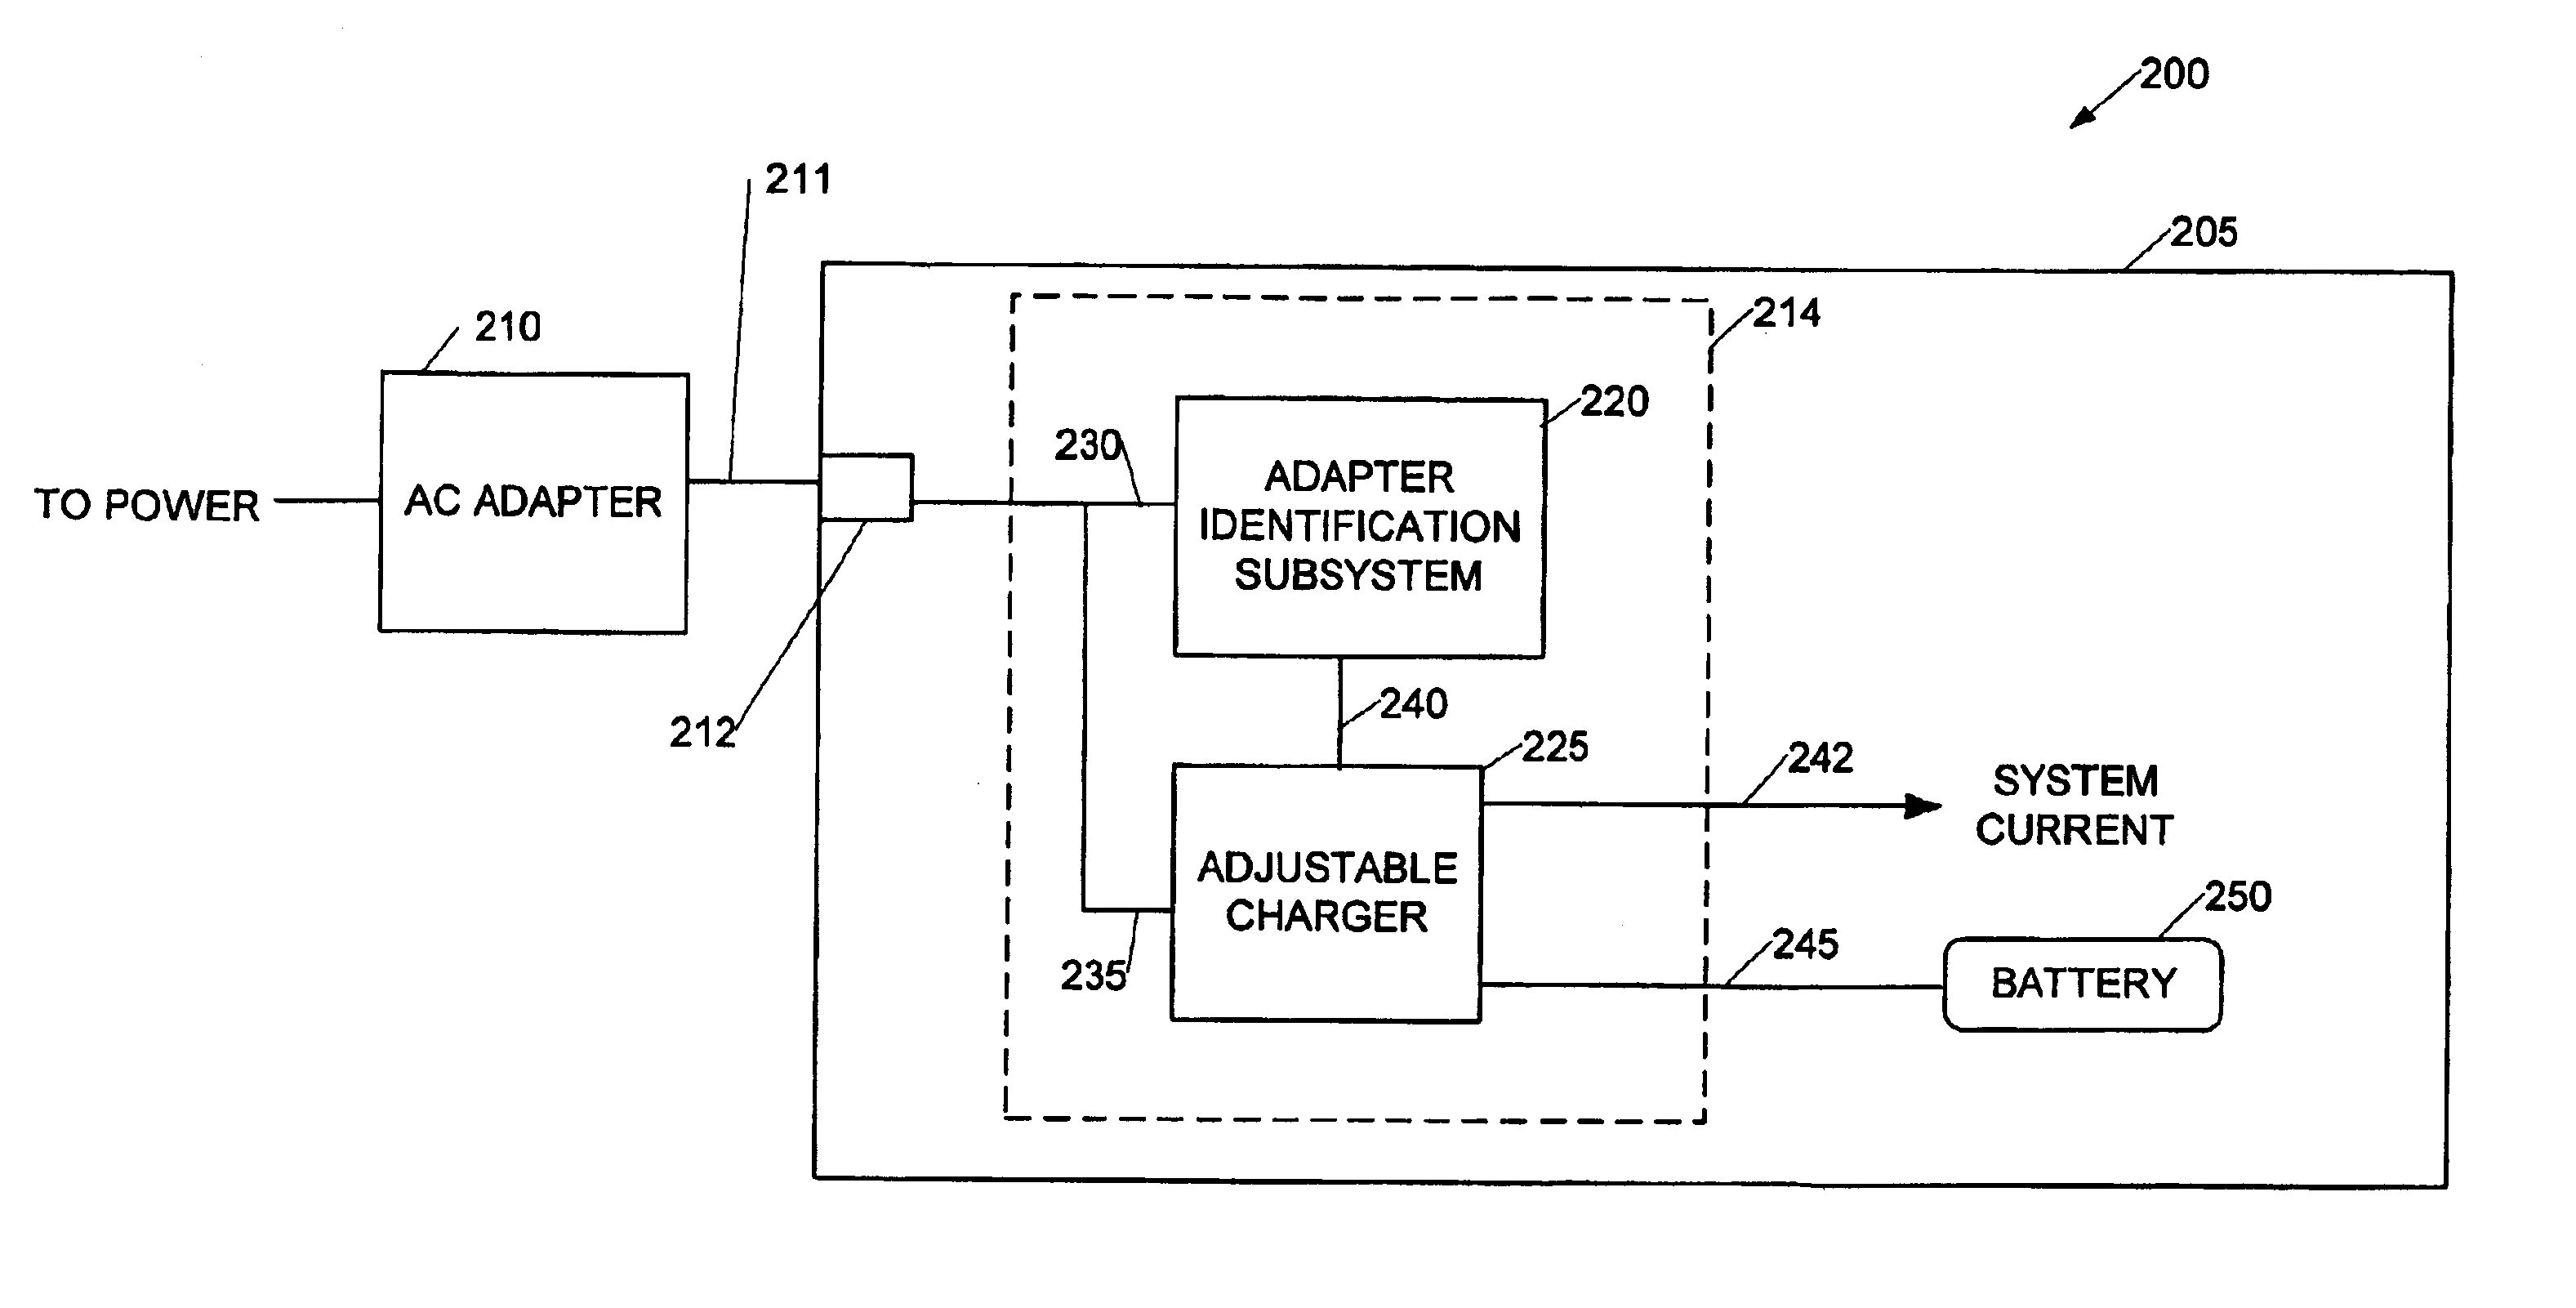 Battery charger current limiting based on maximum current capacity of AC adapter as determined by adapter identification subsystem